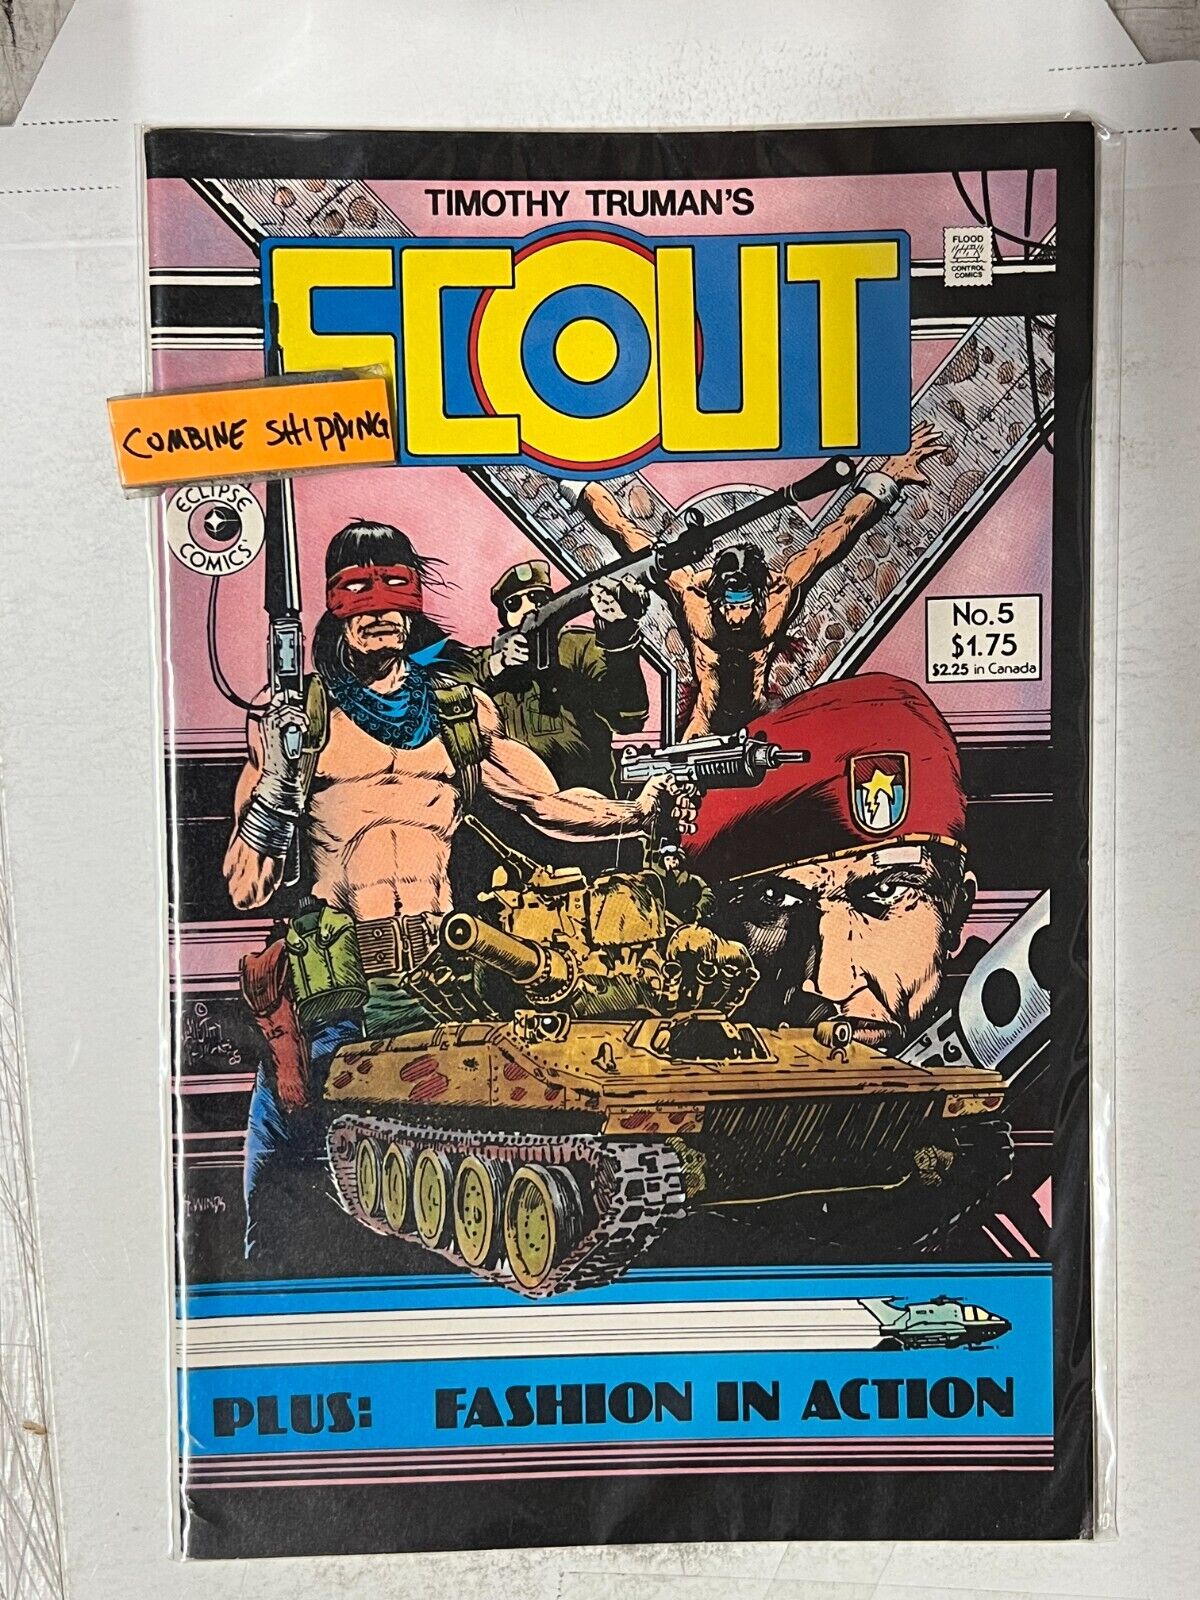 Scout #5 Eclipse 1986 | Combined Shipping B&B